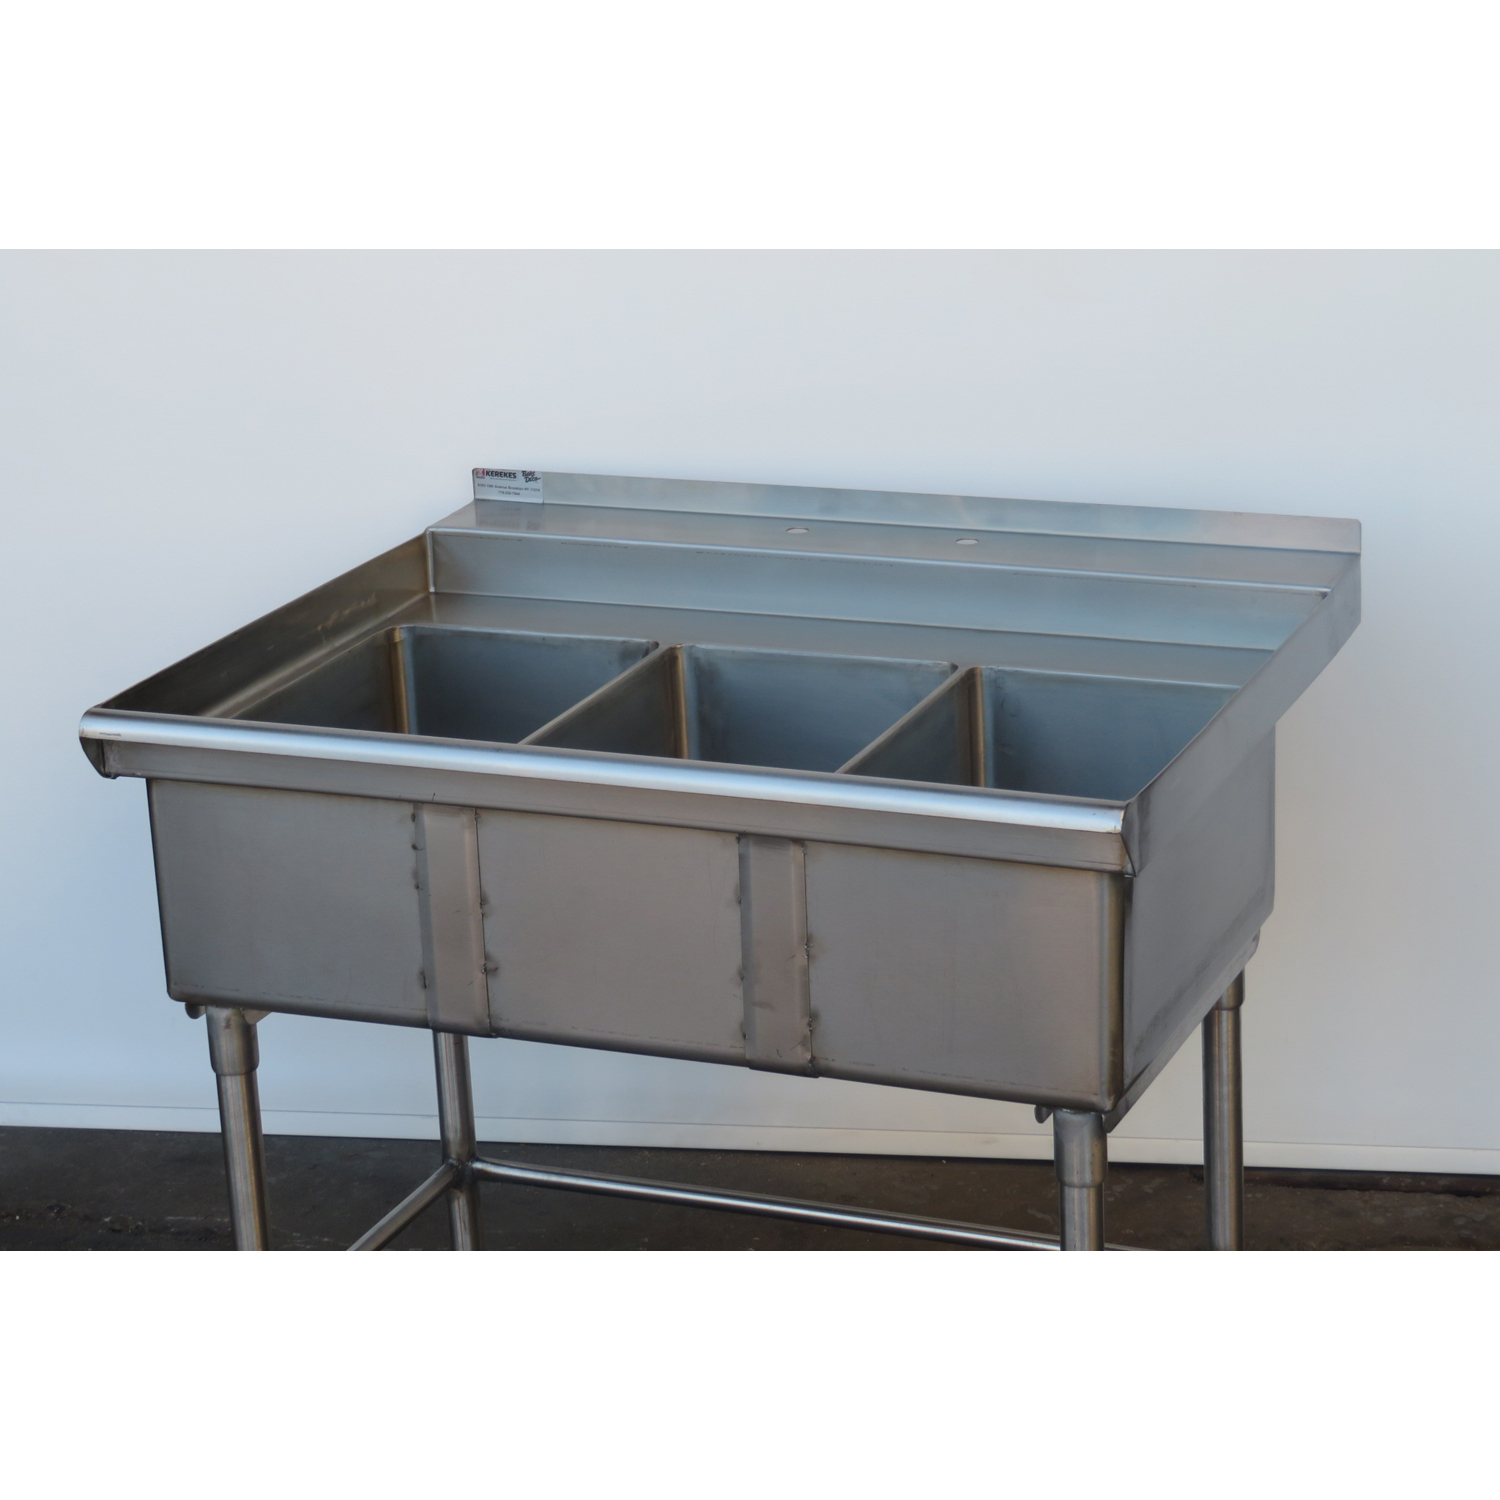 3 Compartment Sink  41.5" X 29.5" image 3